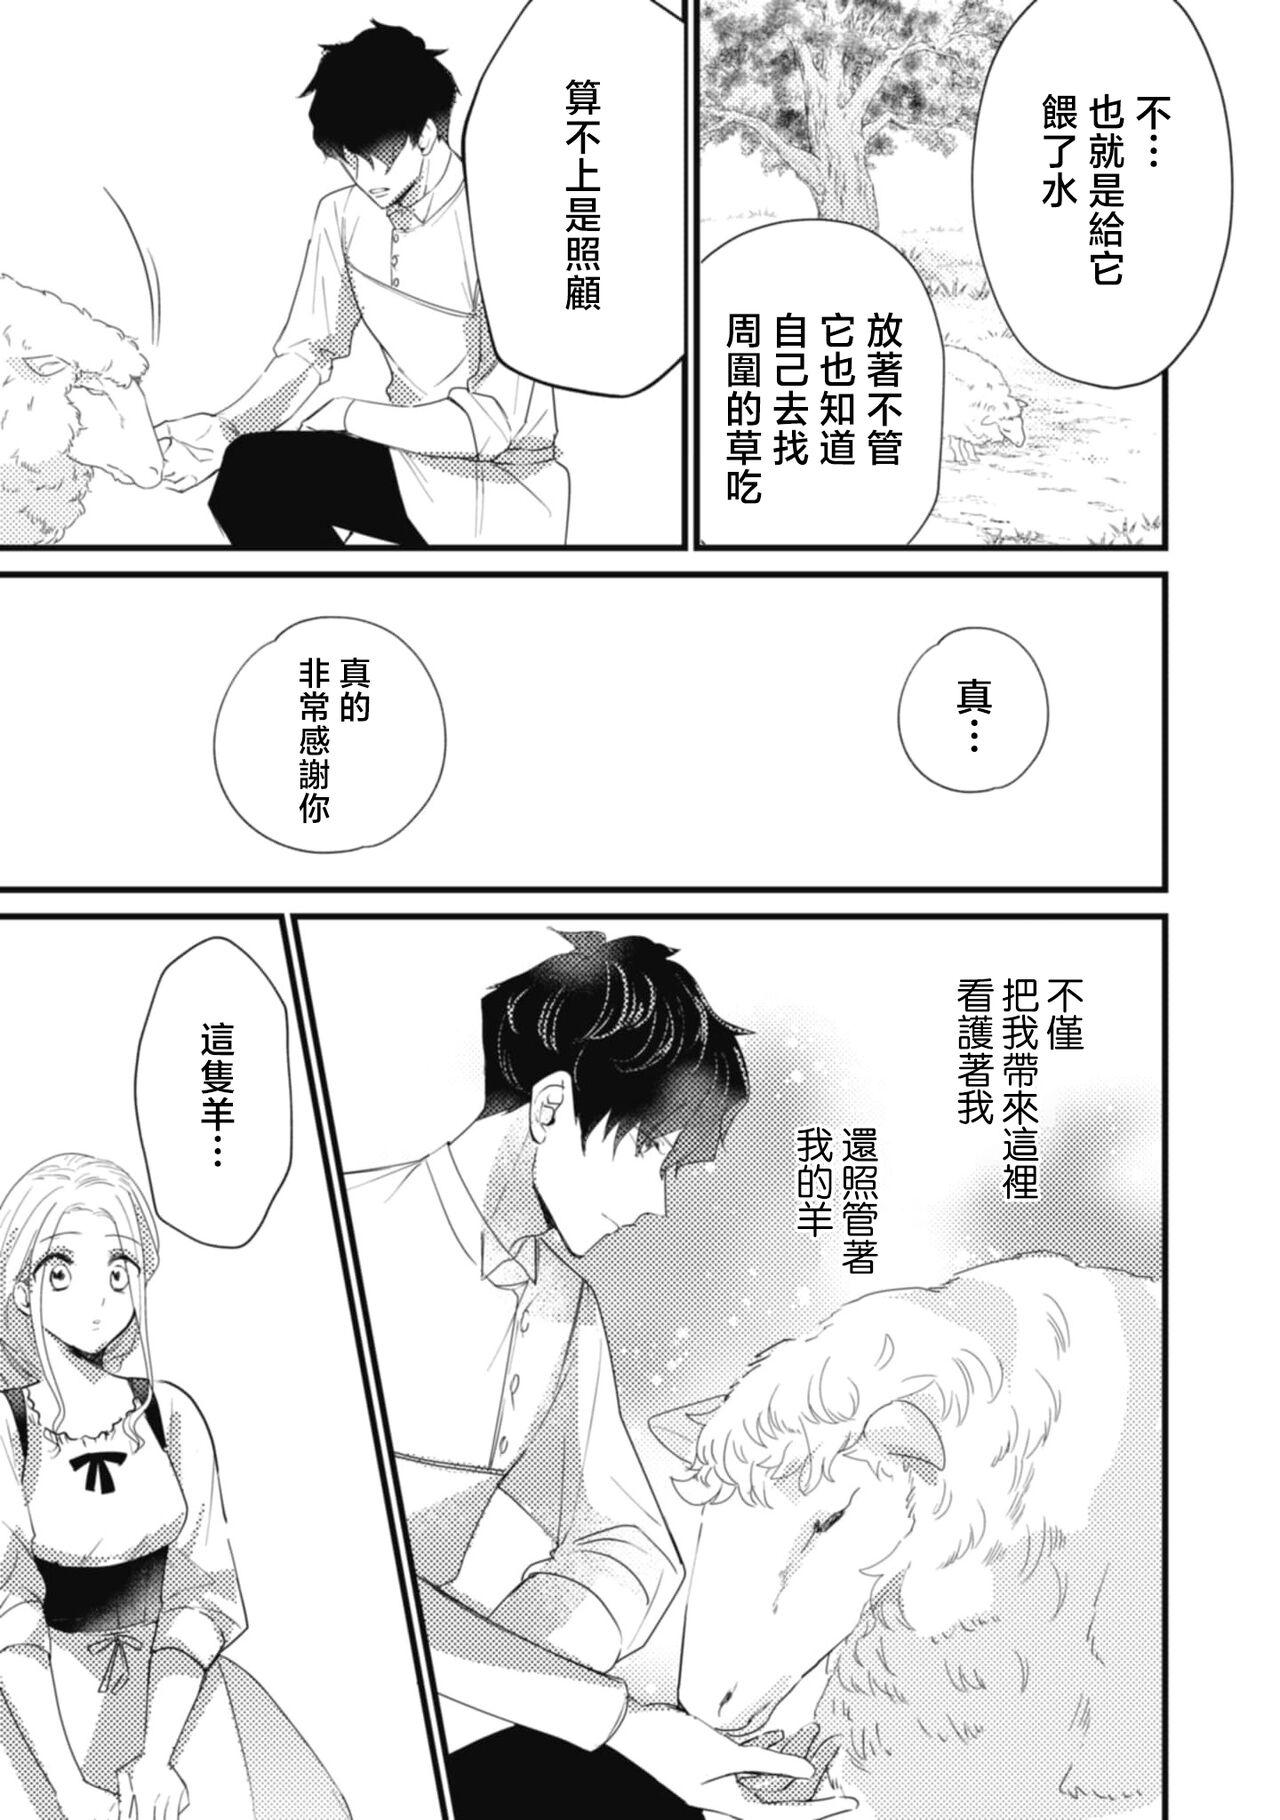 A shepherd in love with a demoted knight | 与被贬骑士相爱的牧羊女1 27